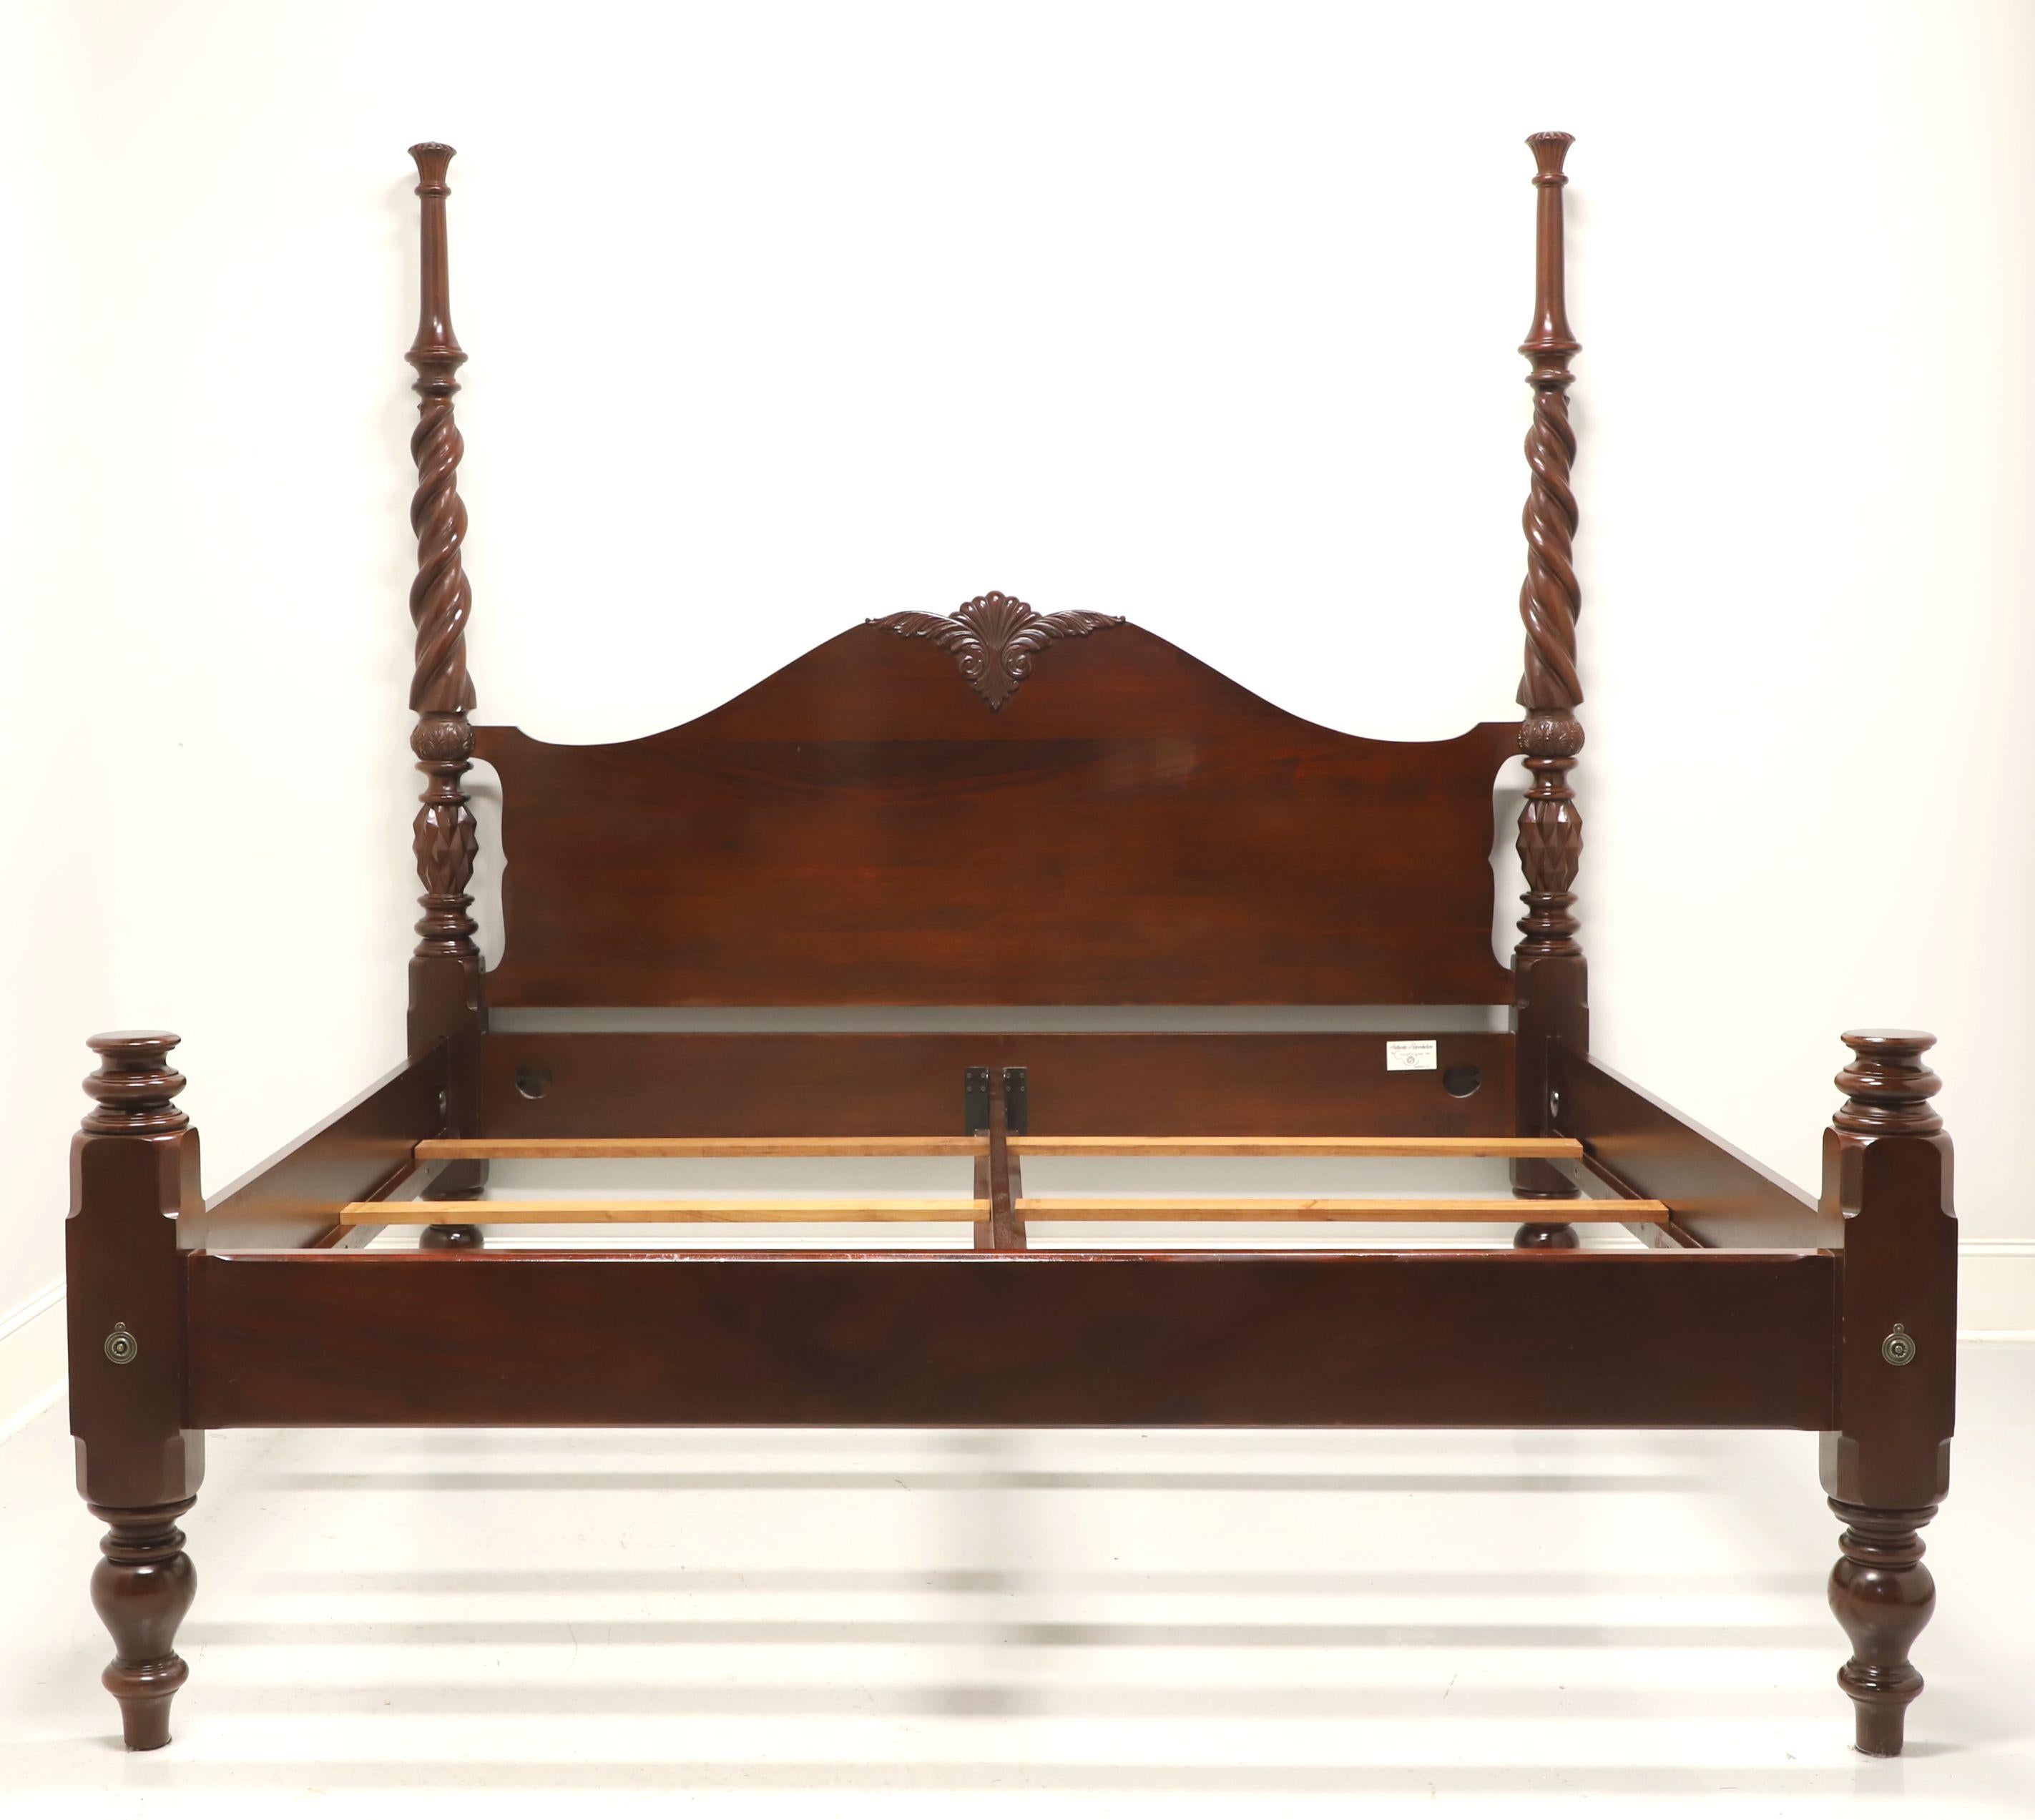 A Traditional style king size poster bed by Craftique, of Mebane, North Carolina, USA. Custom crafted for an adaptation to their four poster barley twist king bed with just two barley twist posts with finials to the decoratively carved arched